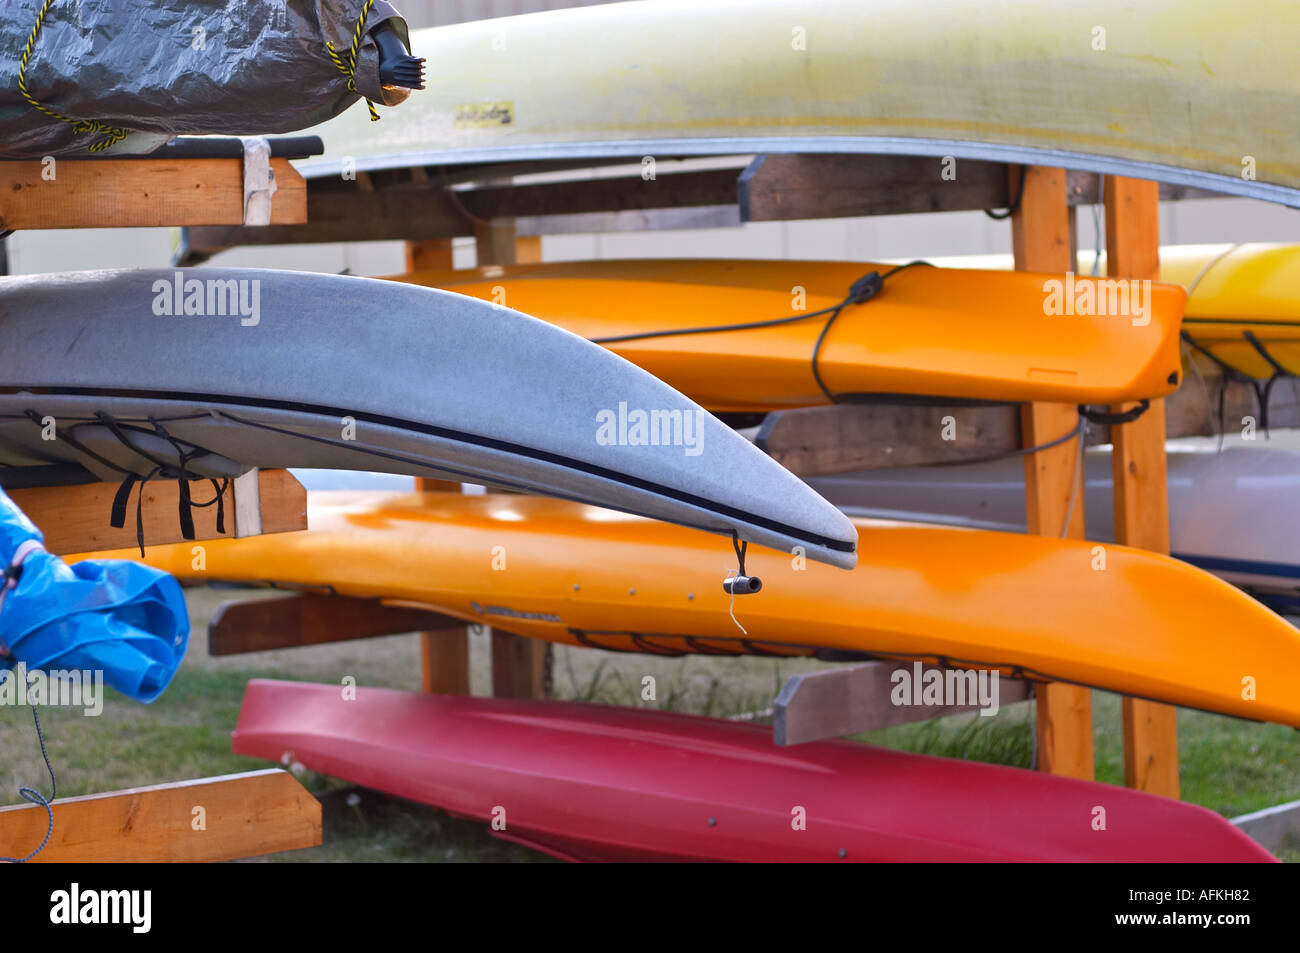 Overturned for drying storage kayaks and canoes Stock Photo